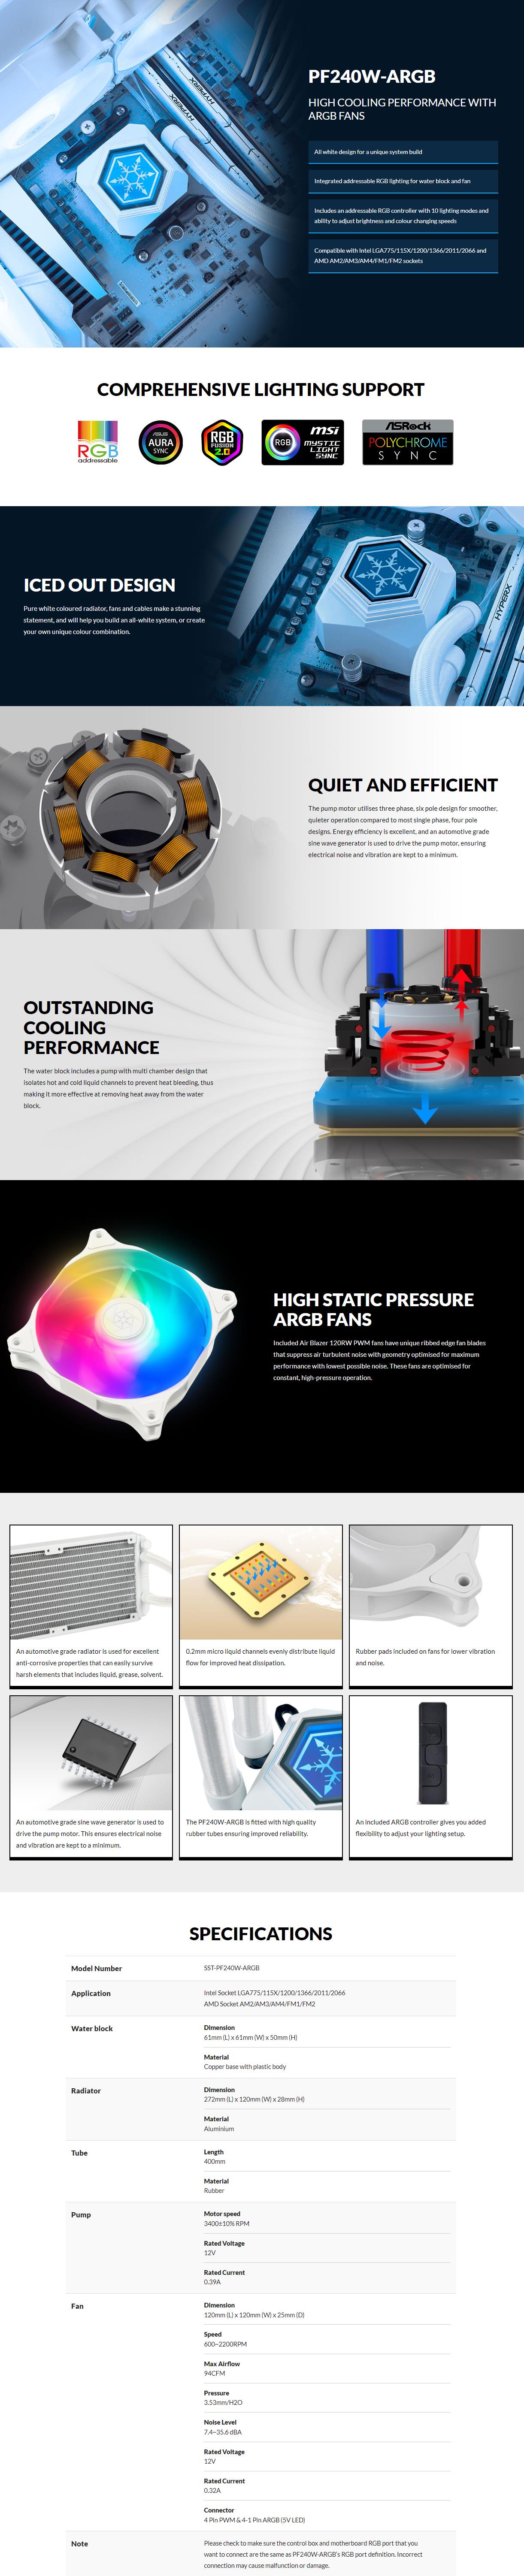 A large marketing image providing additional information about the product SilverStone Permafrost 240W ARGB Liquid CPU Cooler - White - Additional alt info not provided